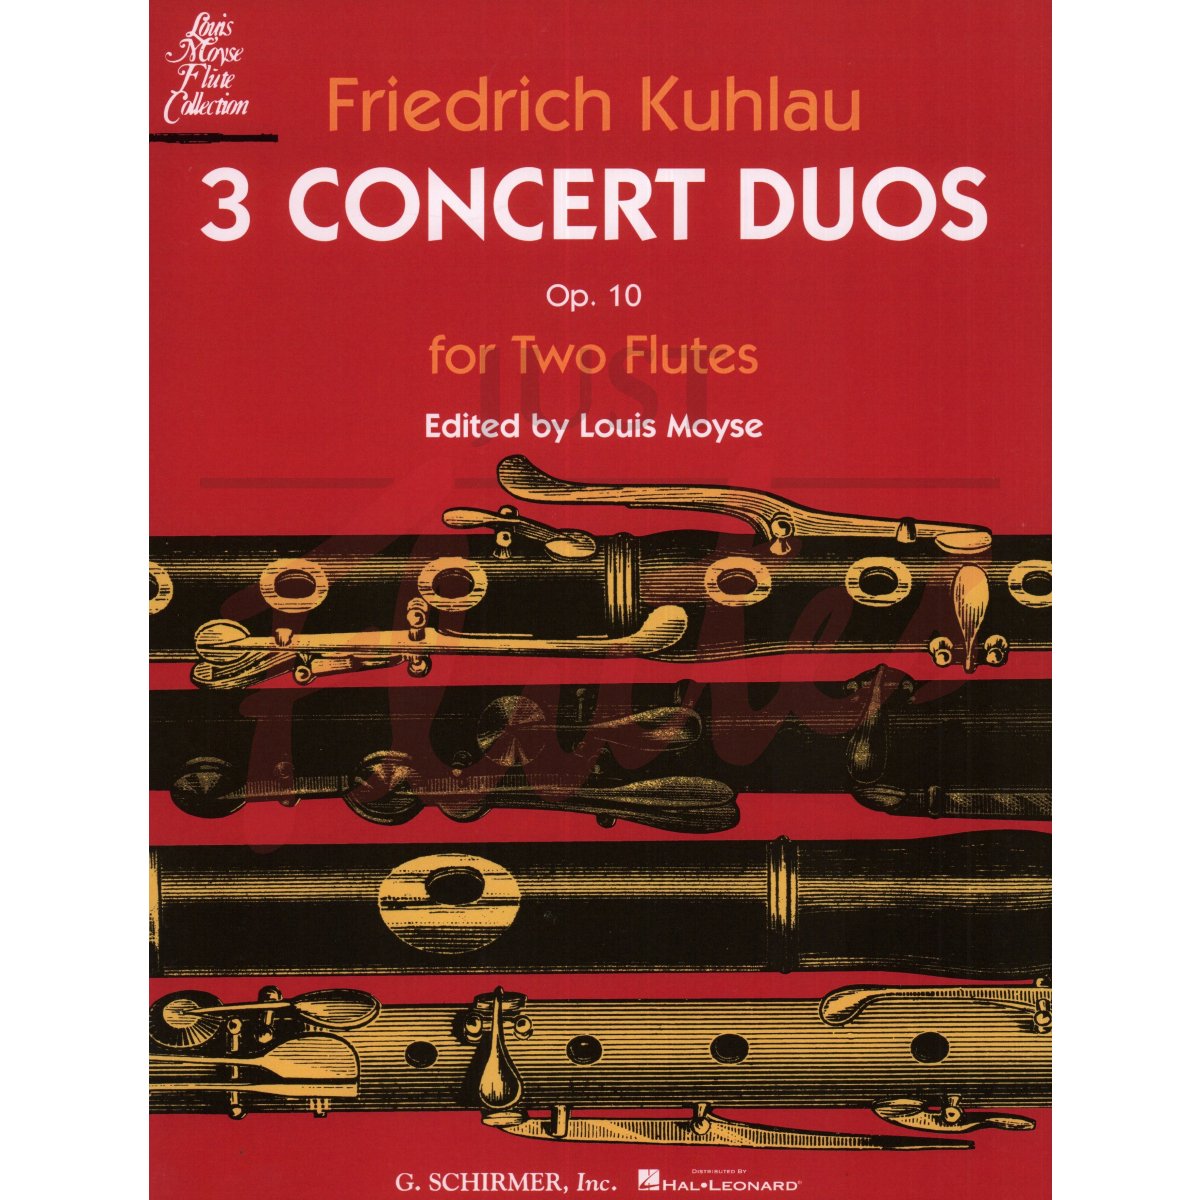 3 Concert Duos for Two Flutes